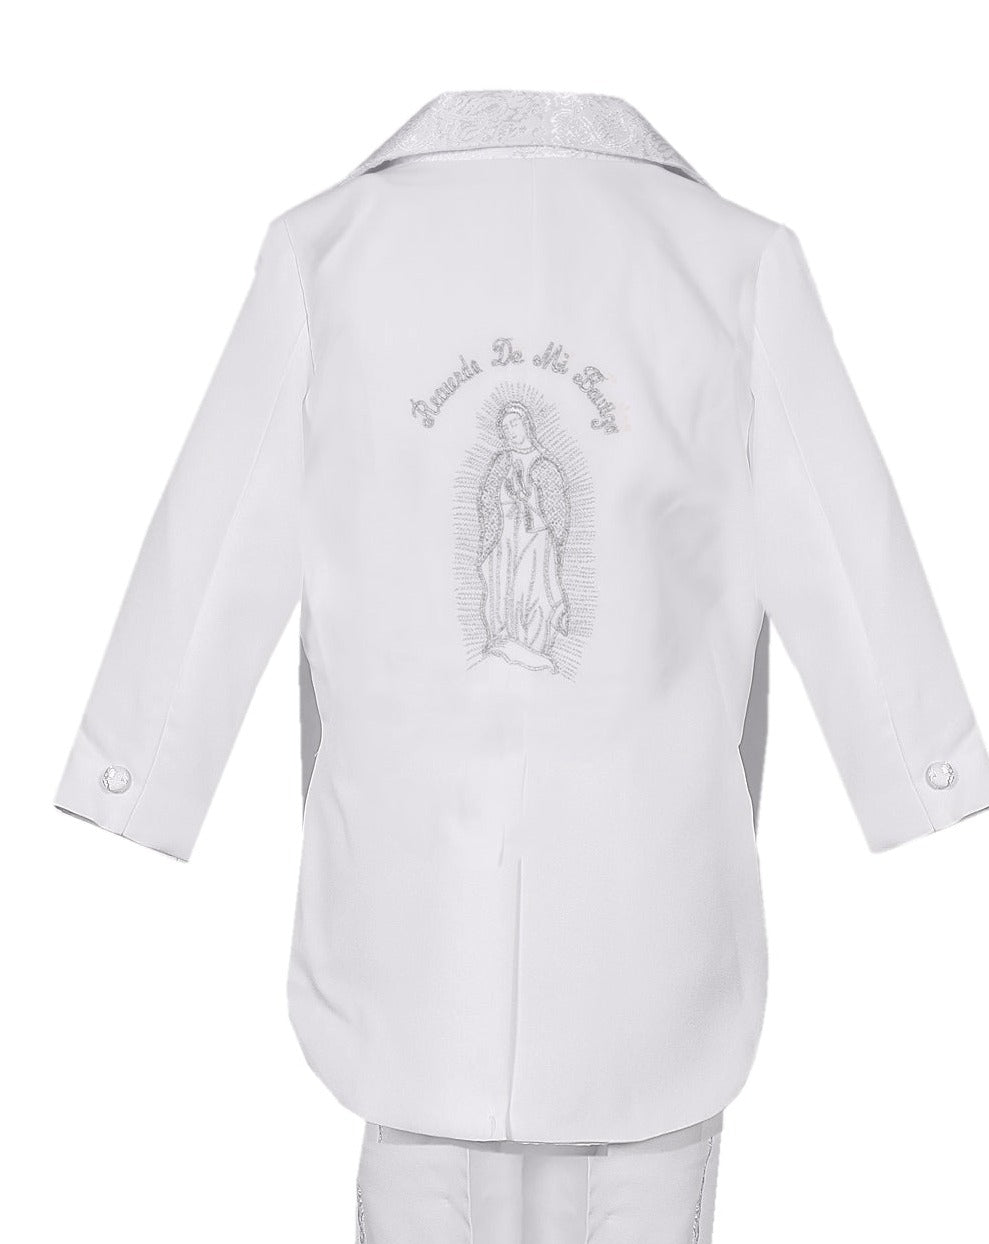 Boys Baptism Tuxedo Suit with Estola Silver Embroidery   RFL-011M